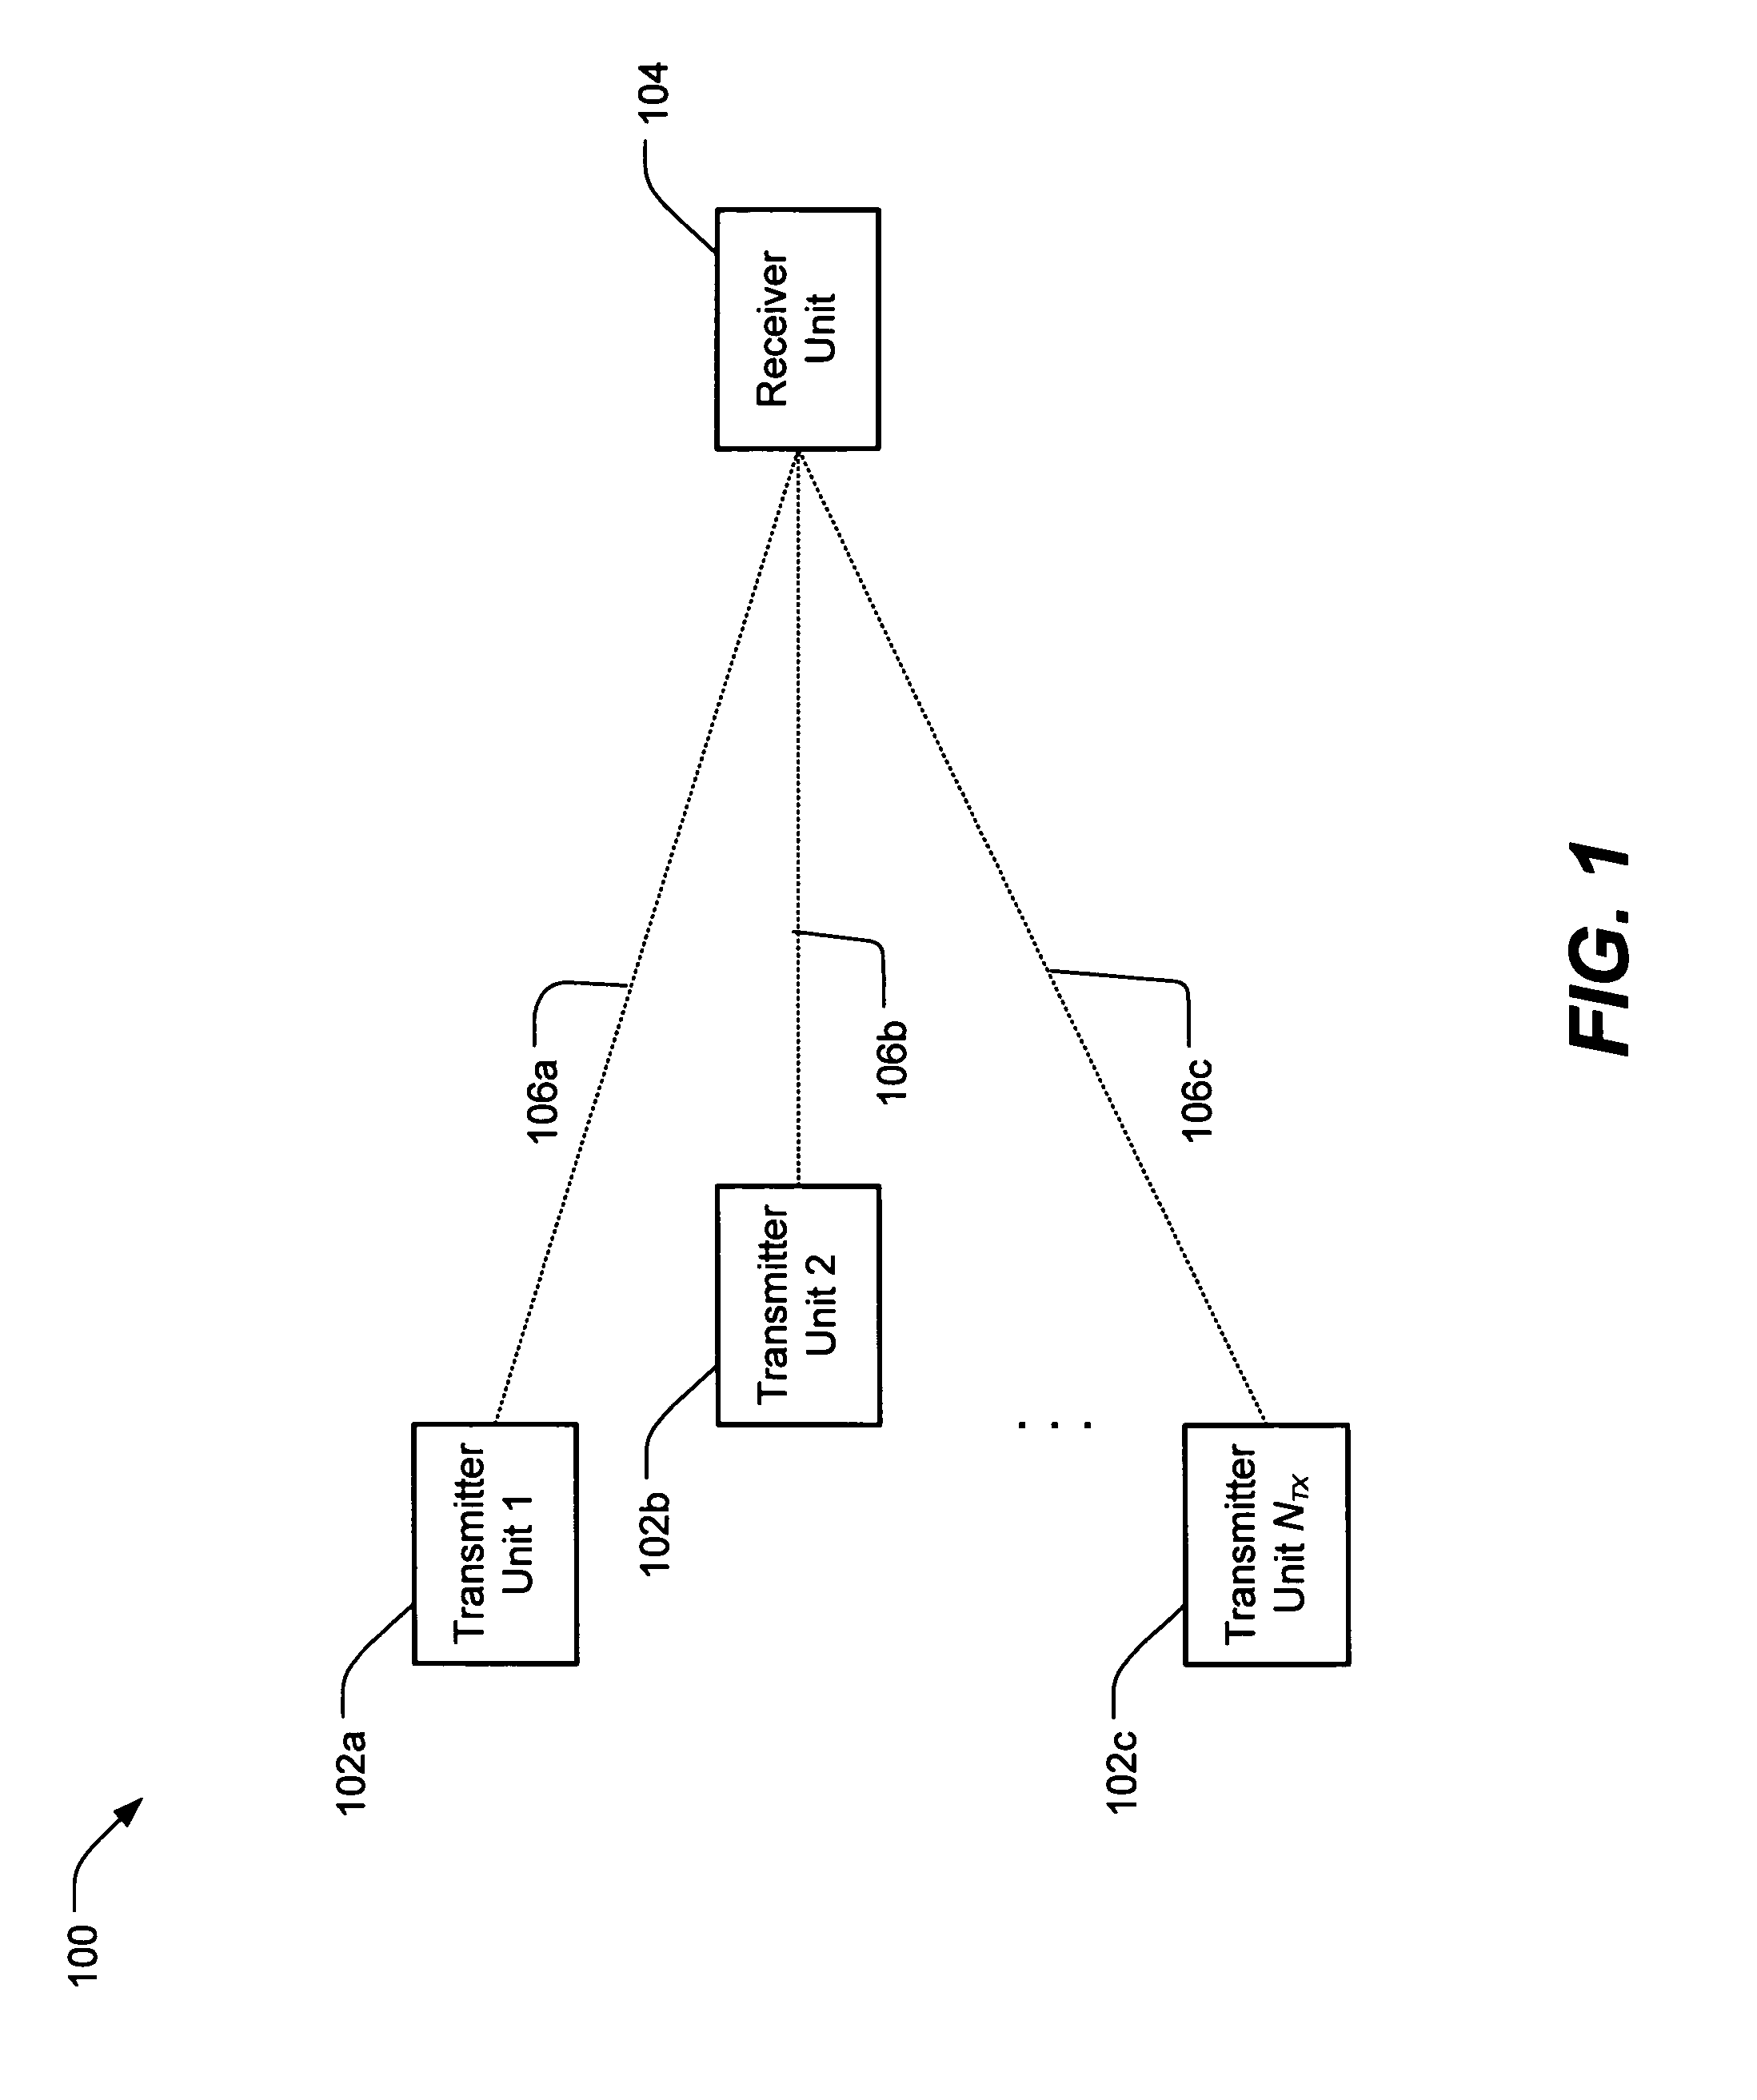 System and method for receiving spread spectrum encoded bursts using a common spreading code